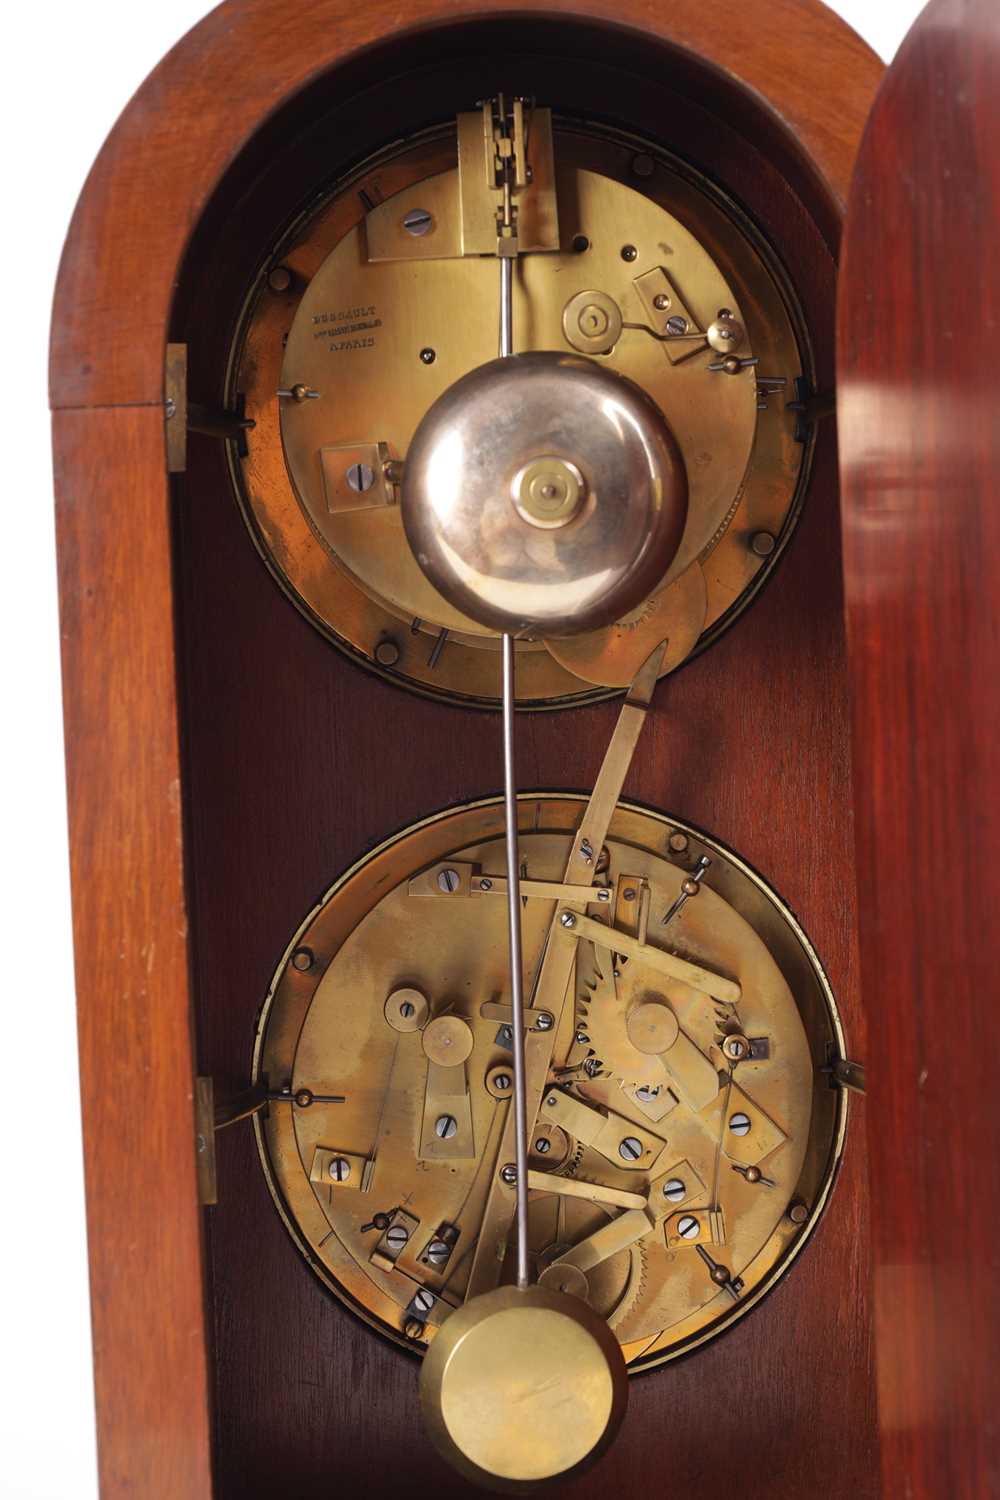 AN EARLY 20TH CENTURY FRENCH PERPETUAL CALENDAR AND MOONPHASE MANTEL CLOCK - Image 8 of 13